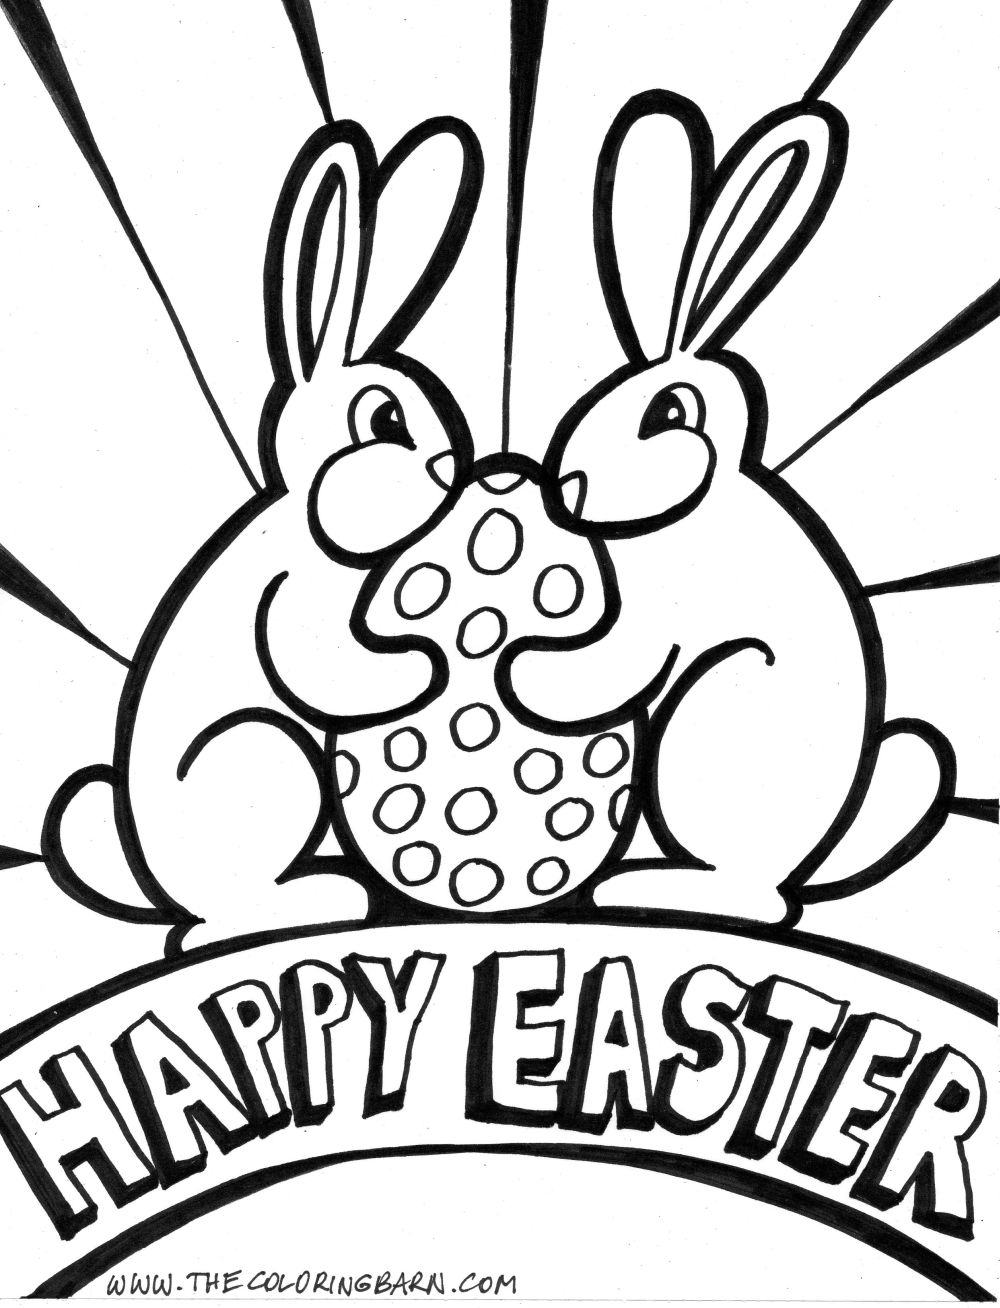 Crayola Color Alive Coloring Pages Crayola Easter Coloring Pages Pathtalk